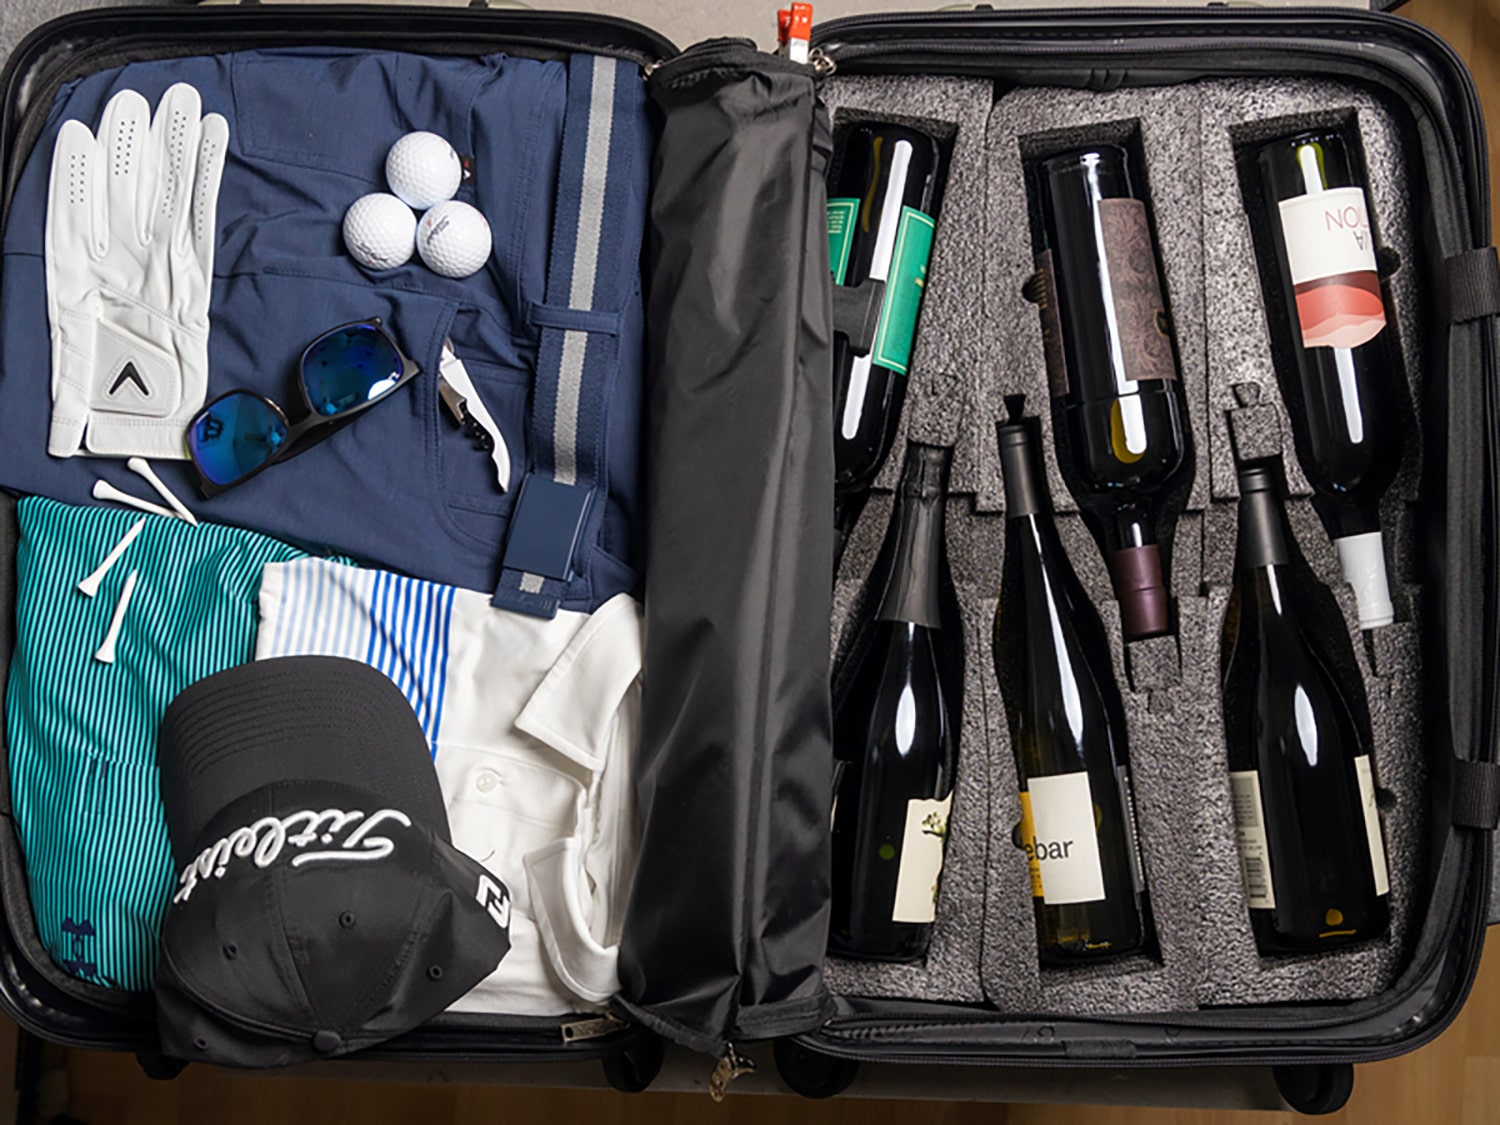 An interior look at a FlyWithWine VinGardeValise suitcase that features foam inserts to protect wine and spirits in flight.